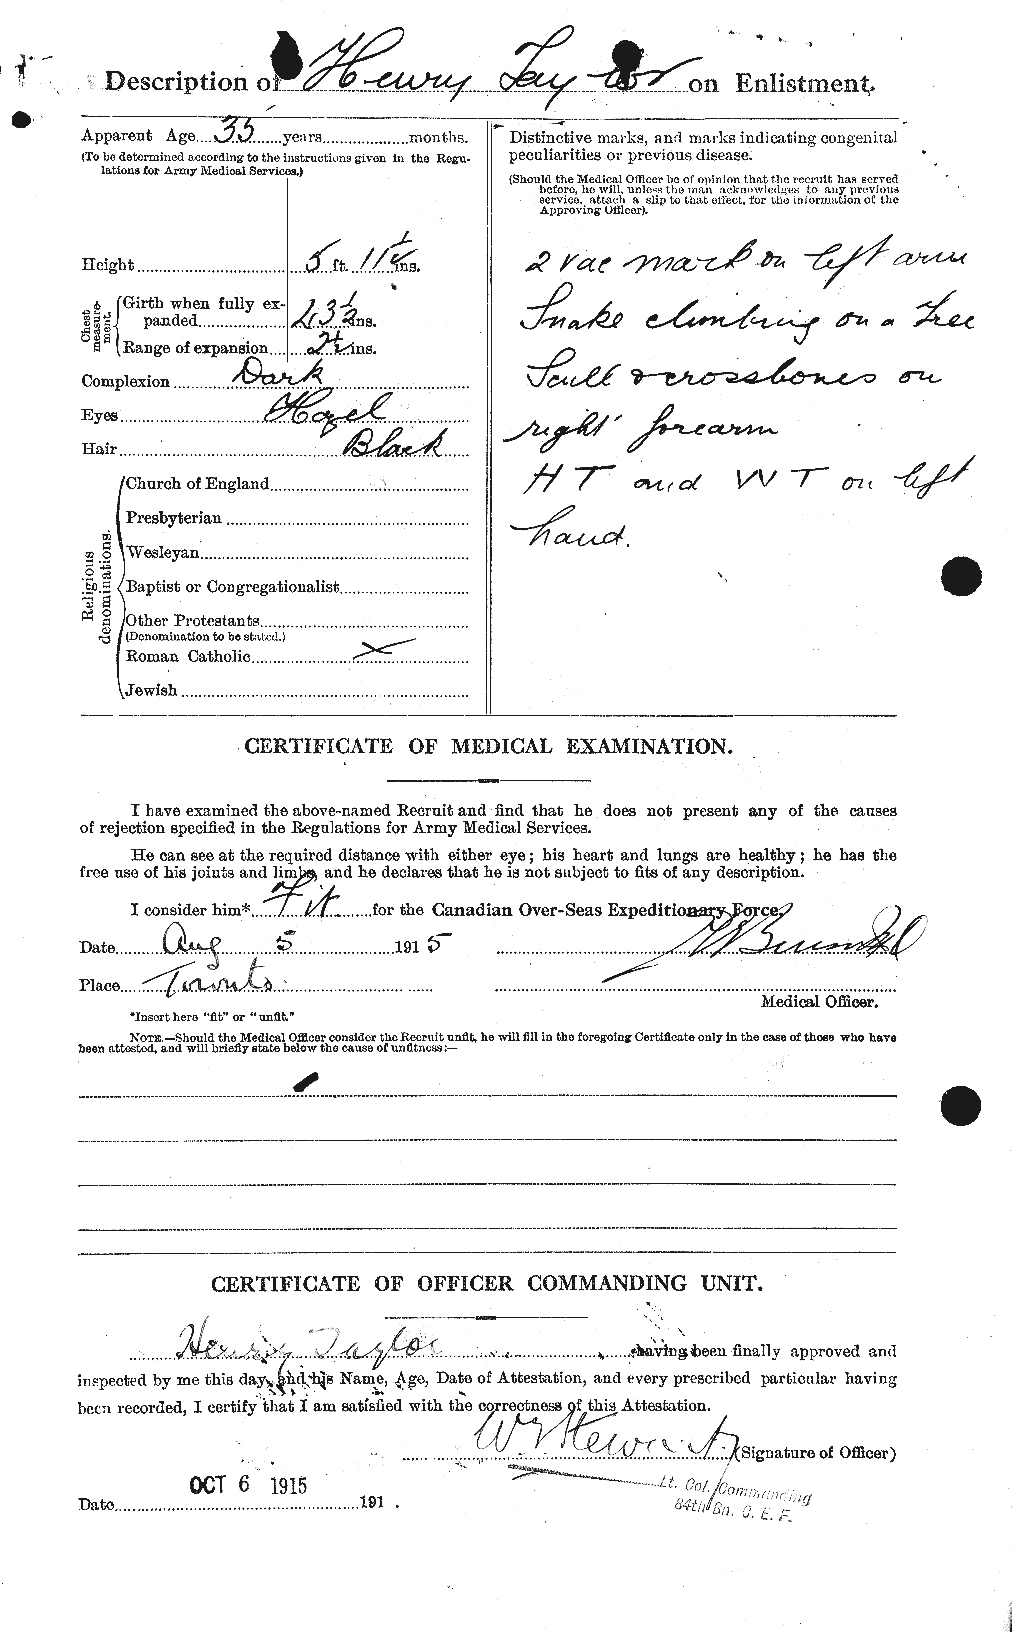 Personnel Records of the First World War - CEF 626526b